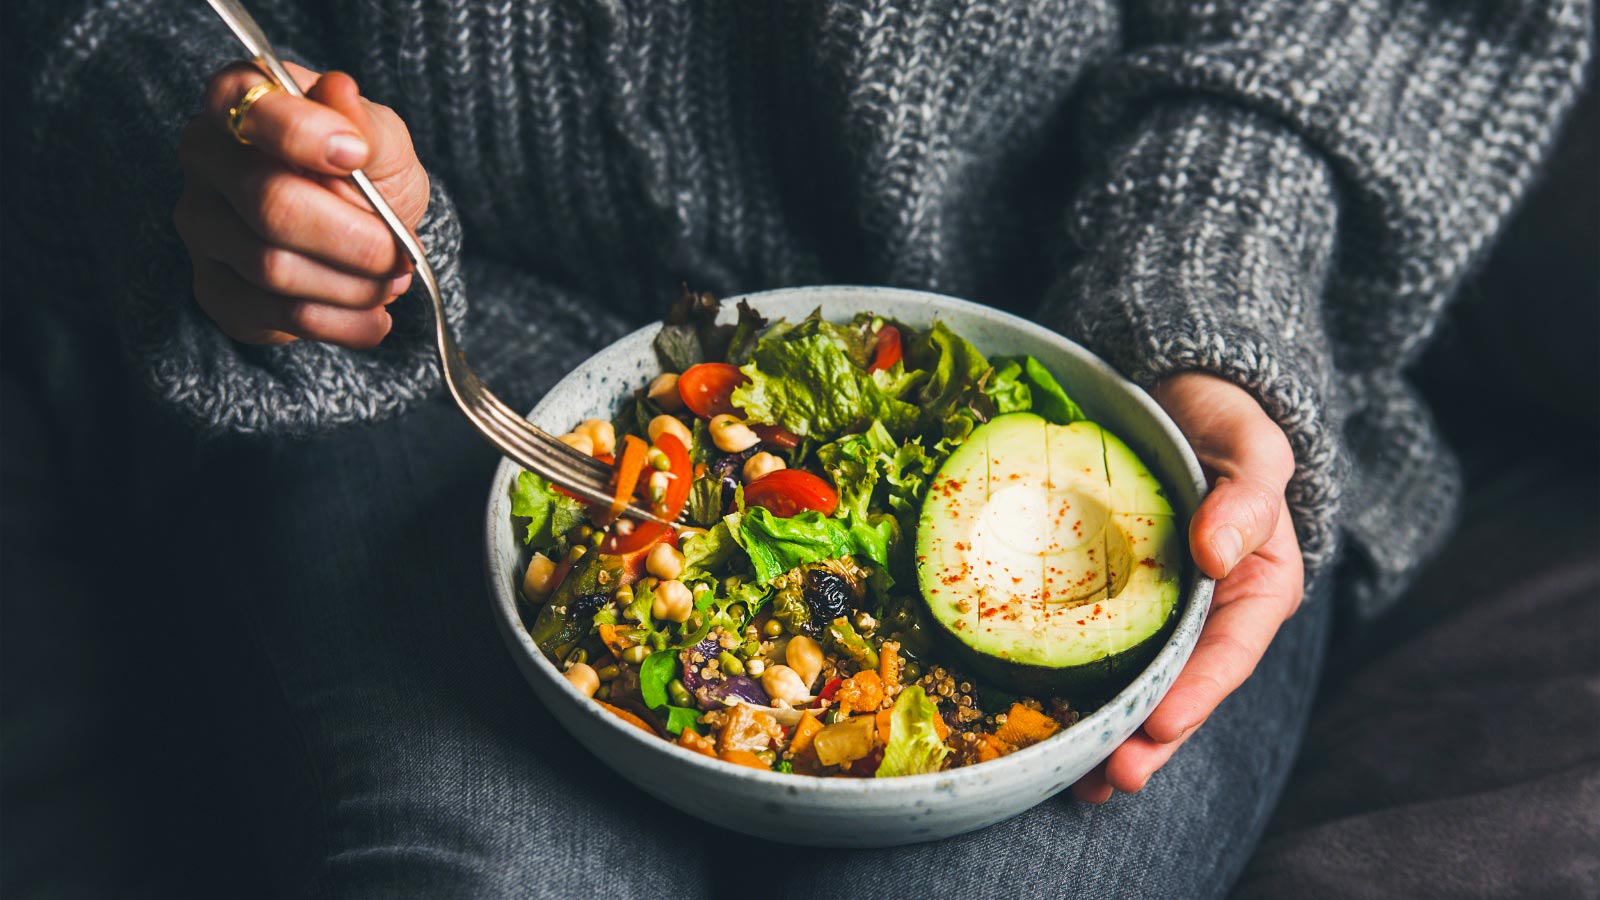 Healthy vegetarian dinner. Woman in jeans and warm sweater holding bowl with fresh salad, avocado, grains, beans, roasted vegetables, close-up.